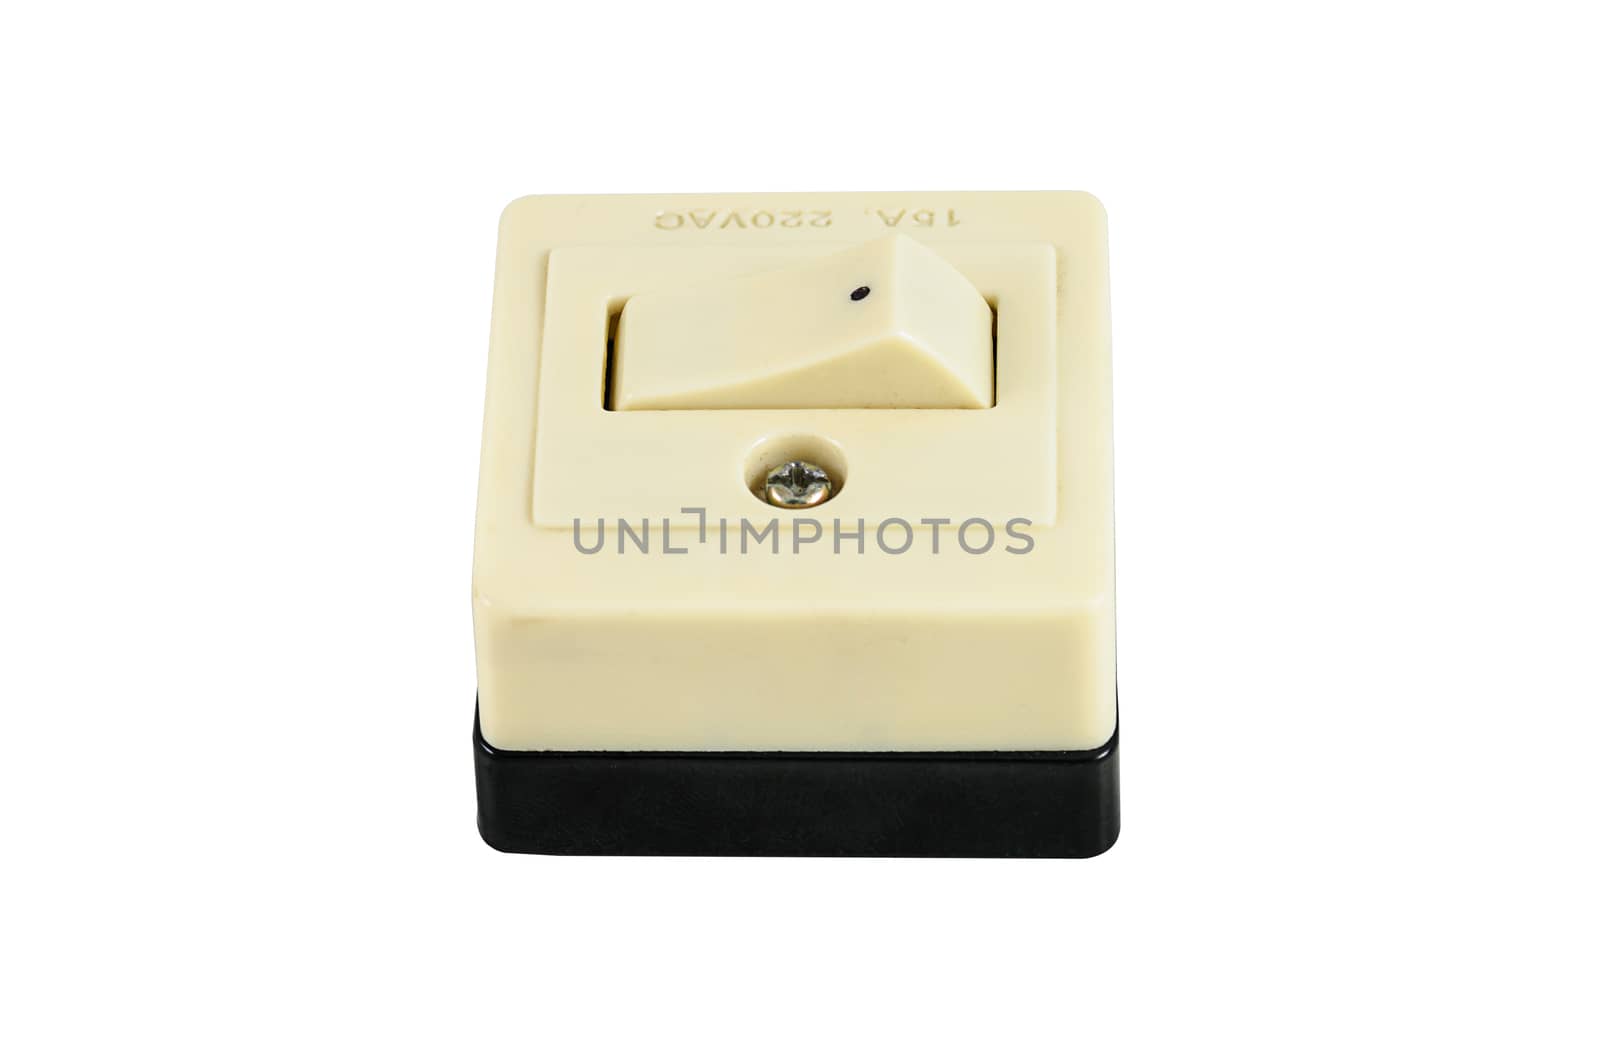 Retro power switch isolated on white background with clipping path